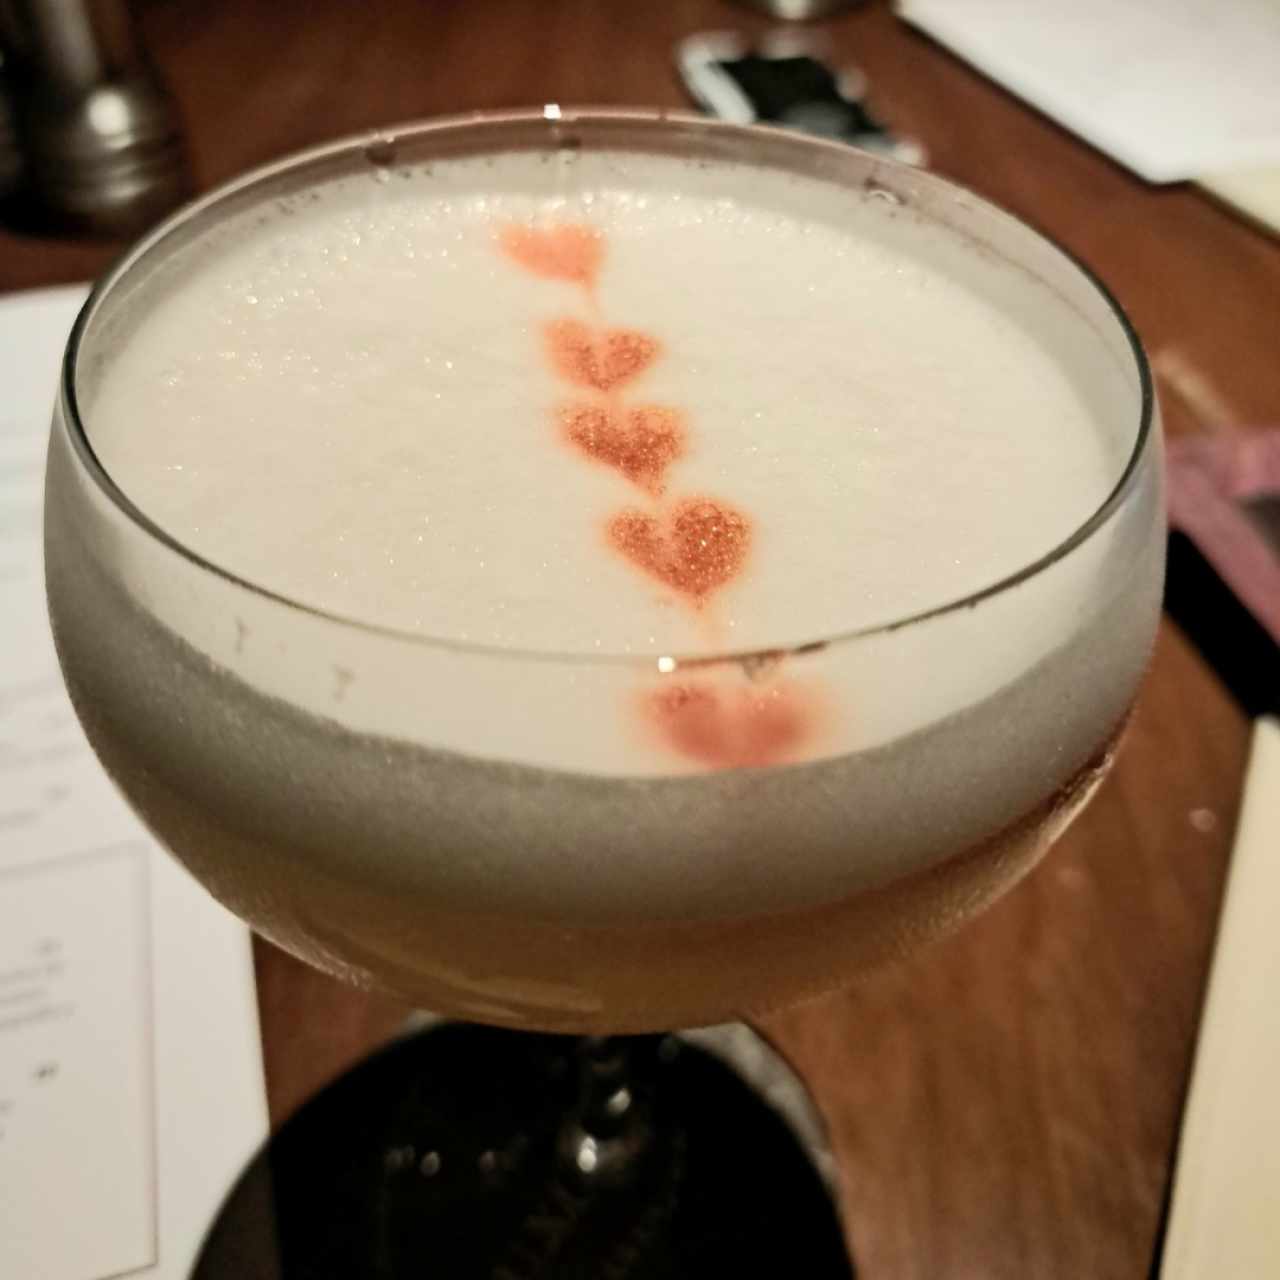 whisky sour